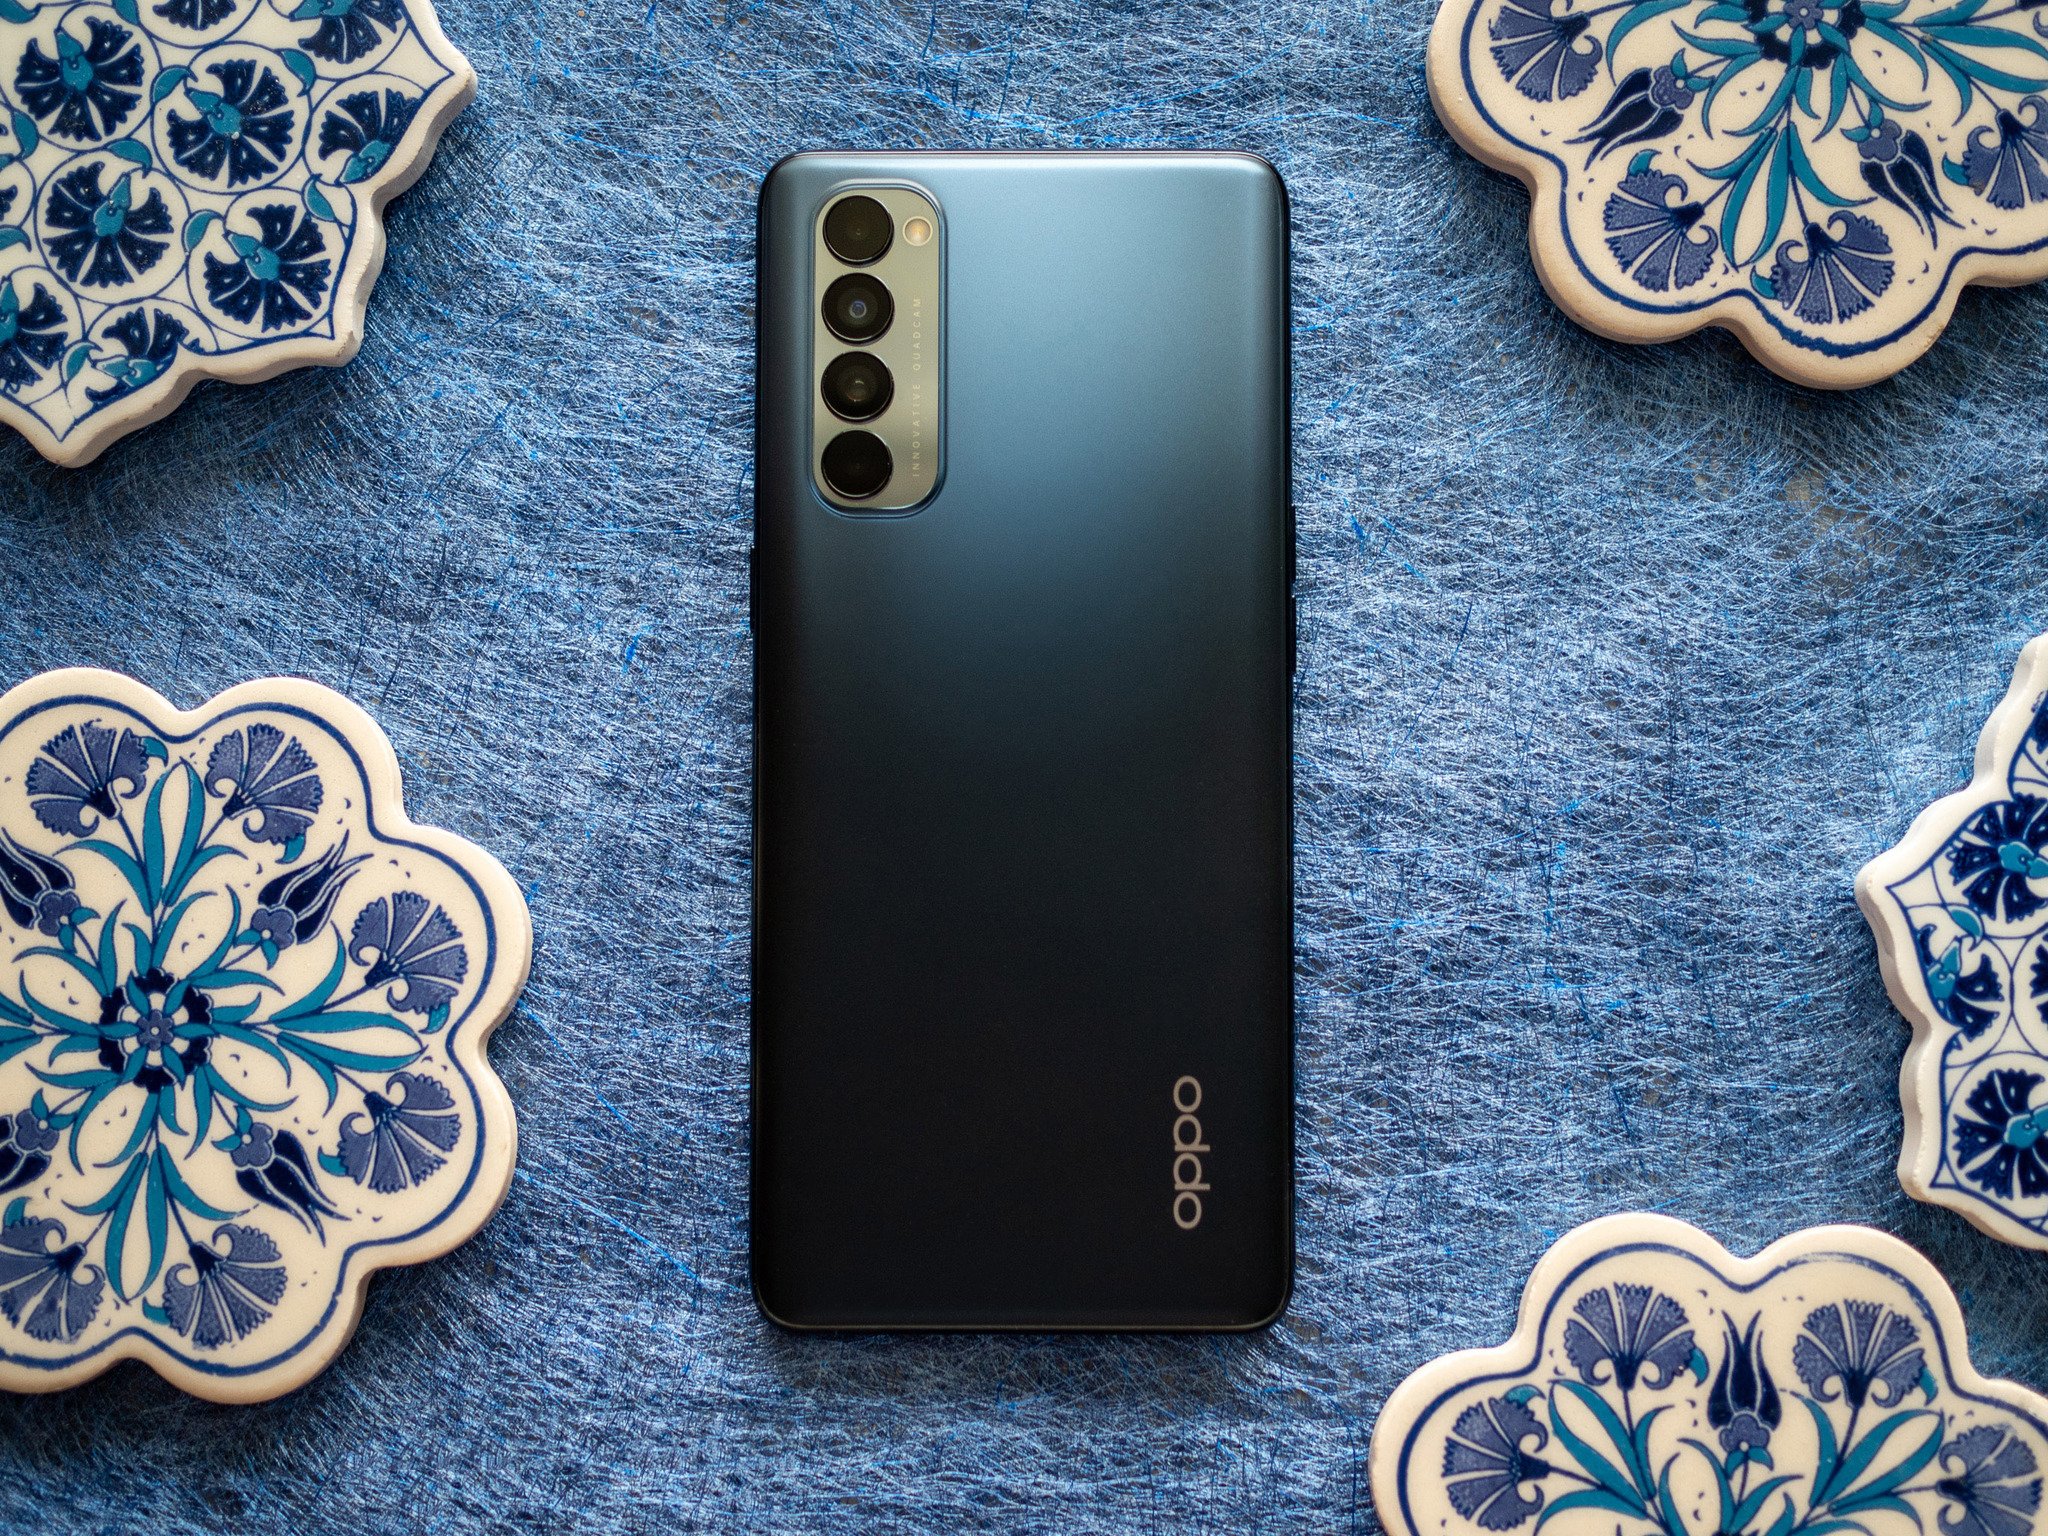 OPPO Reno 4 Pro review: Premium design let down by an underwhelming chipset | Android Central